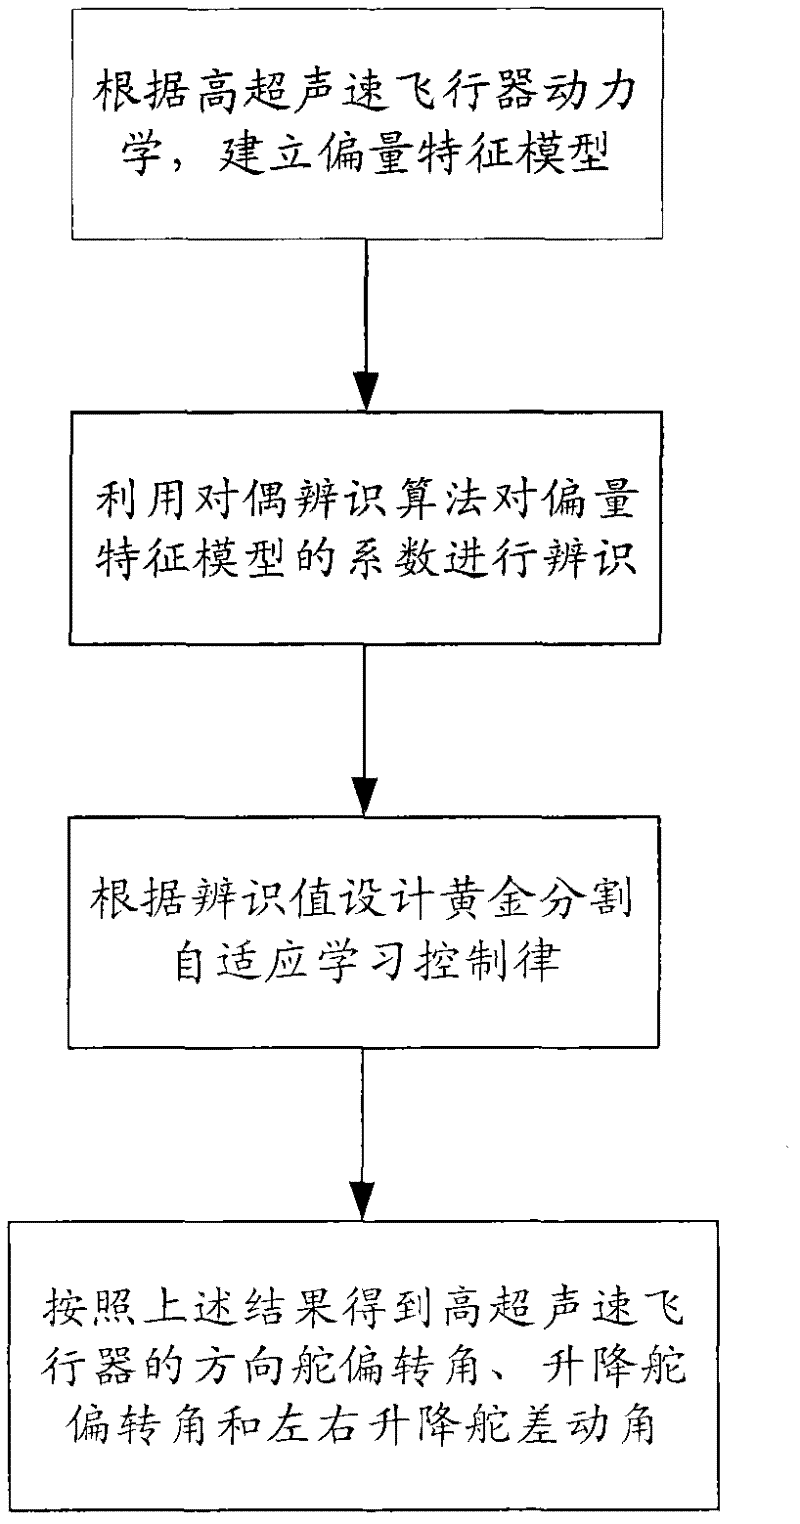 Hypersonic aircraft self-adaptive learning control method based on deviator characteristic model